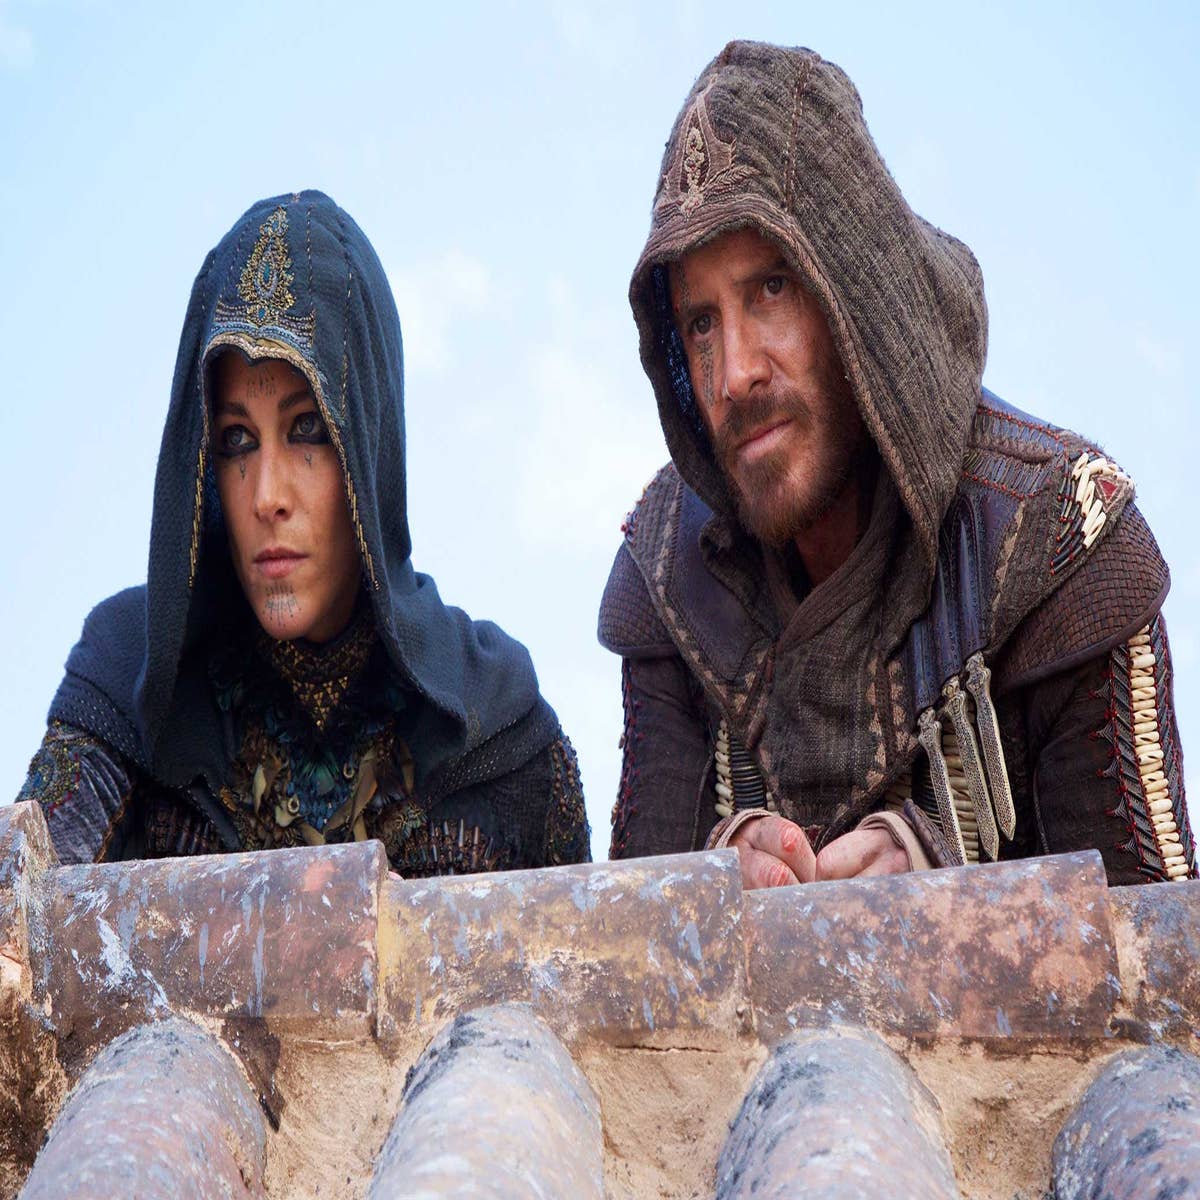 Assassin's Creed, Official Trailer 2 [HD]